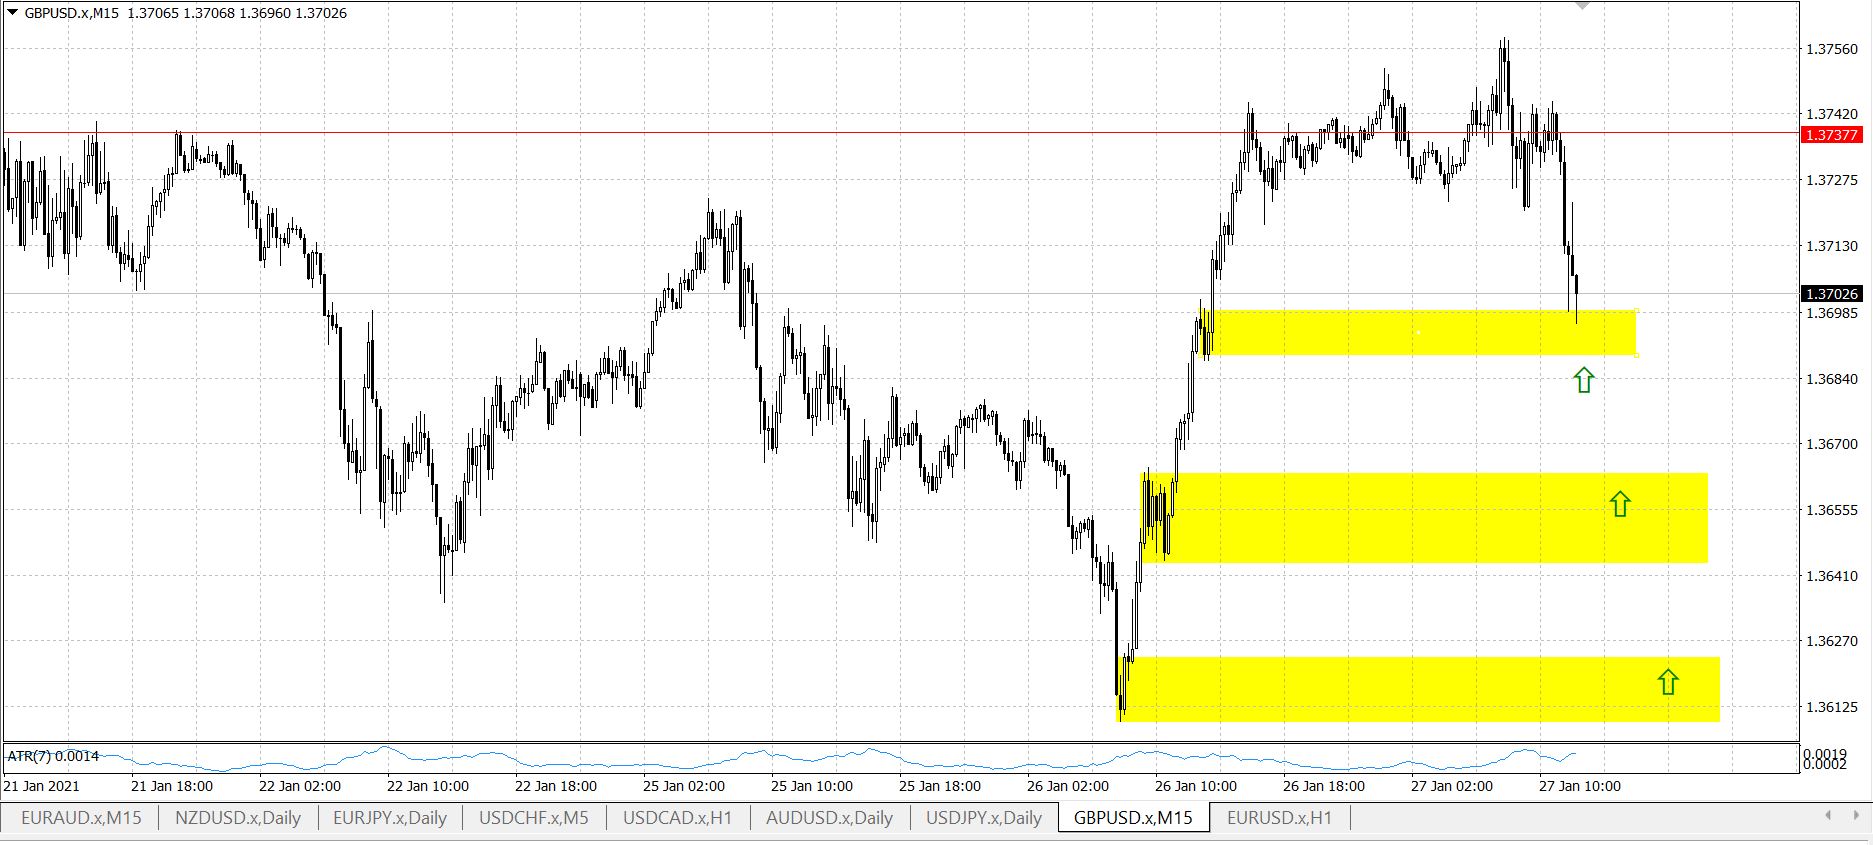 GBP/USD M15 Supply and demand